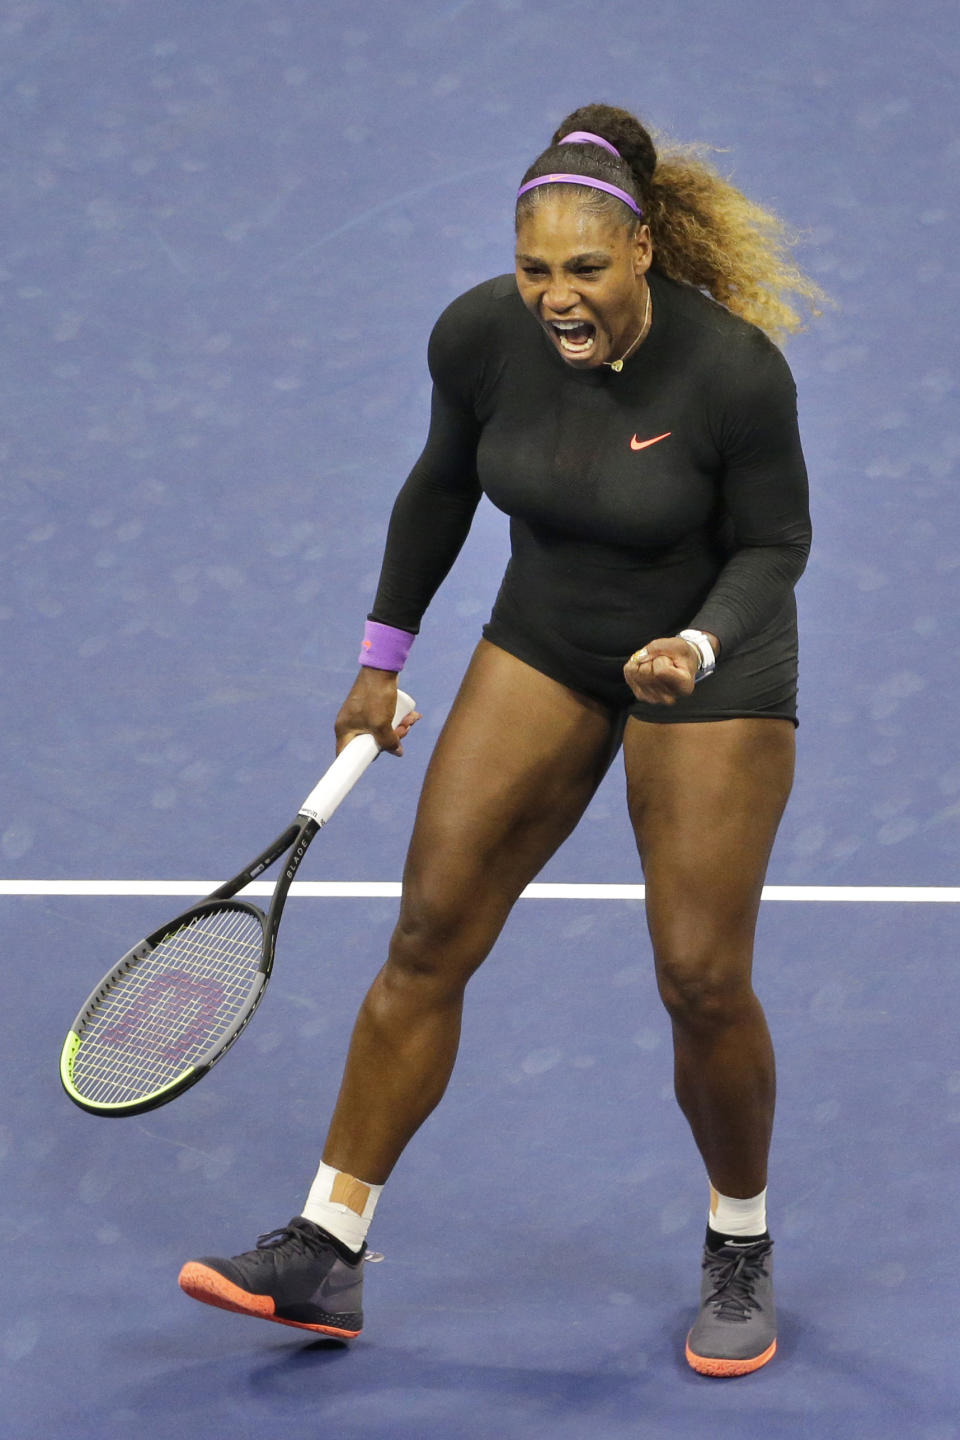 Serena Williams, of the United States, reacts after winning a point during her match against Qiang Wang, of China, during the quarterfinals of the U.S. Open tennis tournament Tuesday, Sept. 3, 2019, in New York. (AP Photo/Seth Wenig)